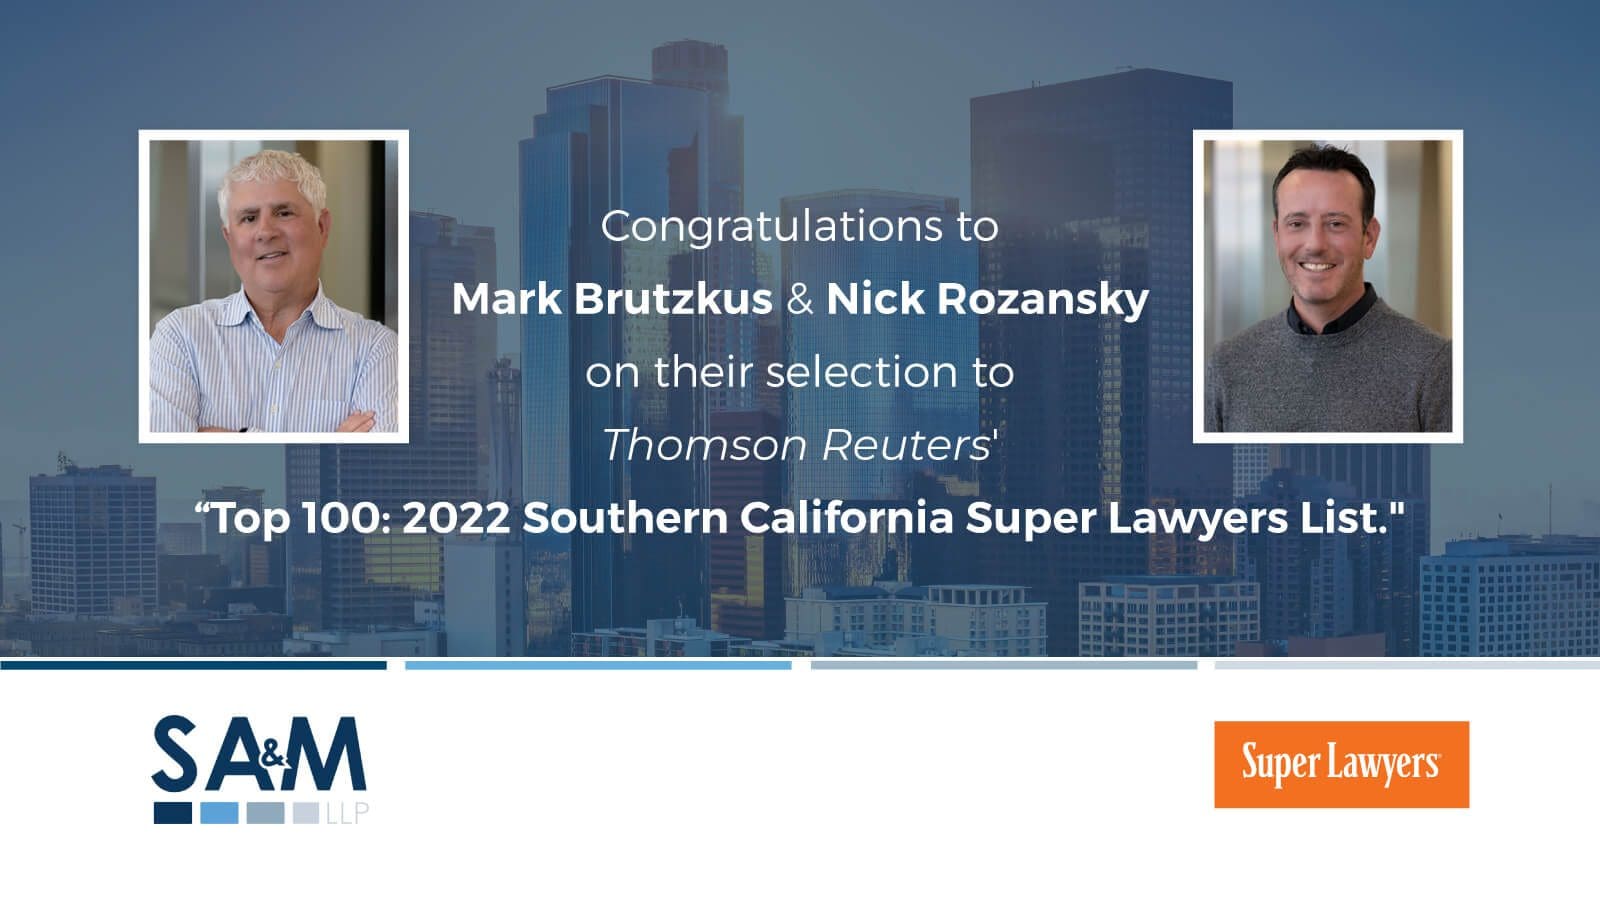 Mark Brutzkus and Nicholas Rozansky Named to “Top 100: 2022 Southern California Super Lawyers List”